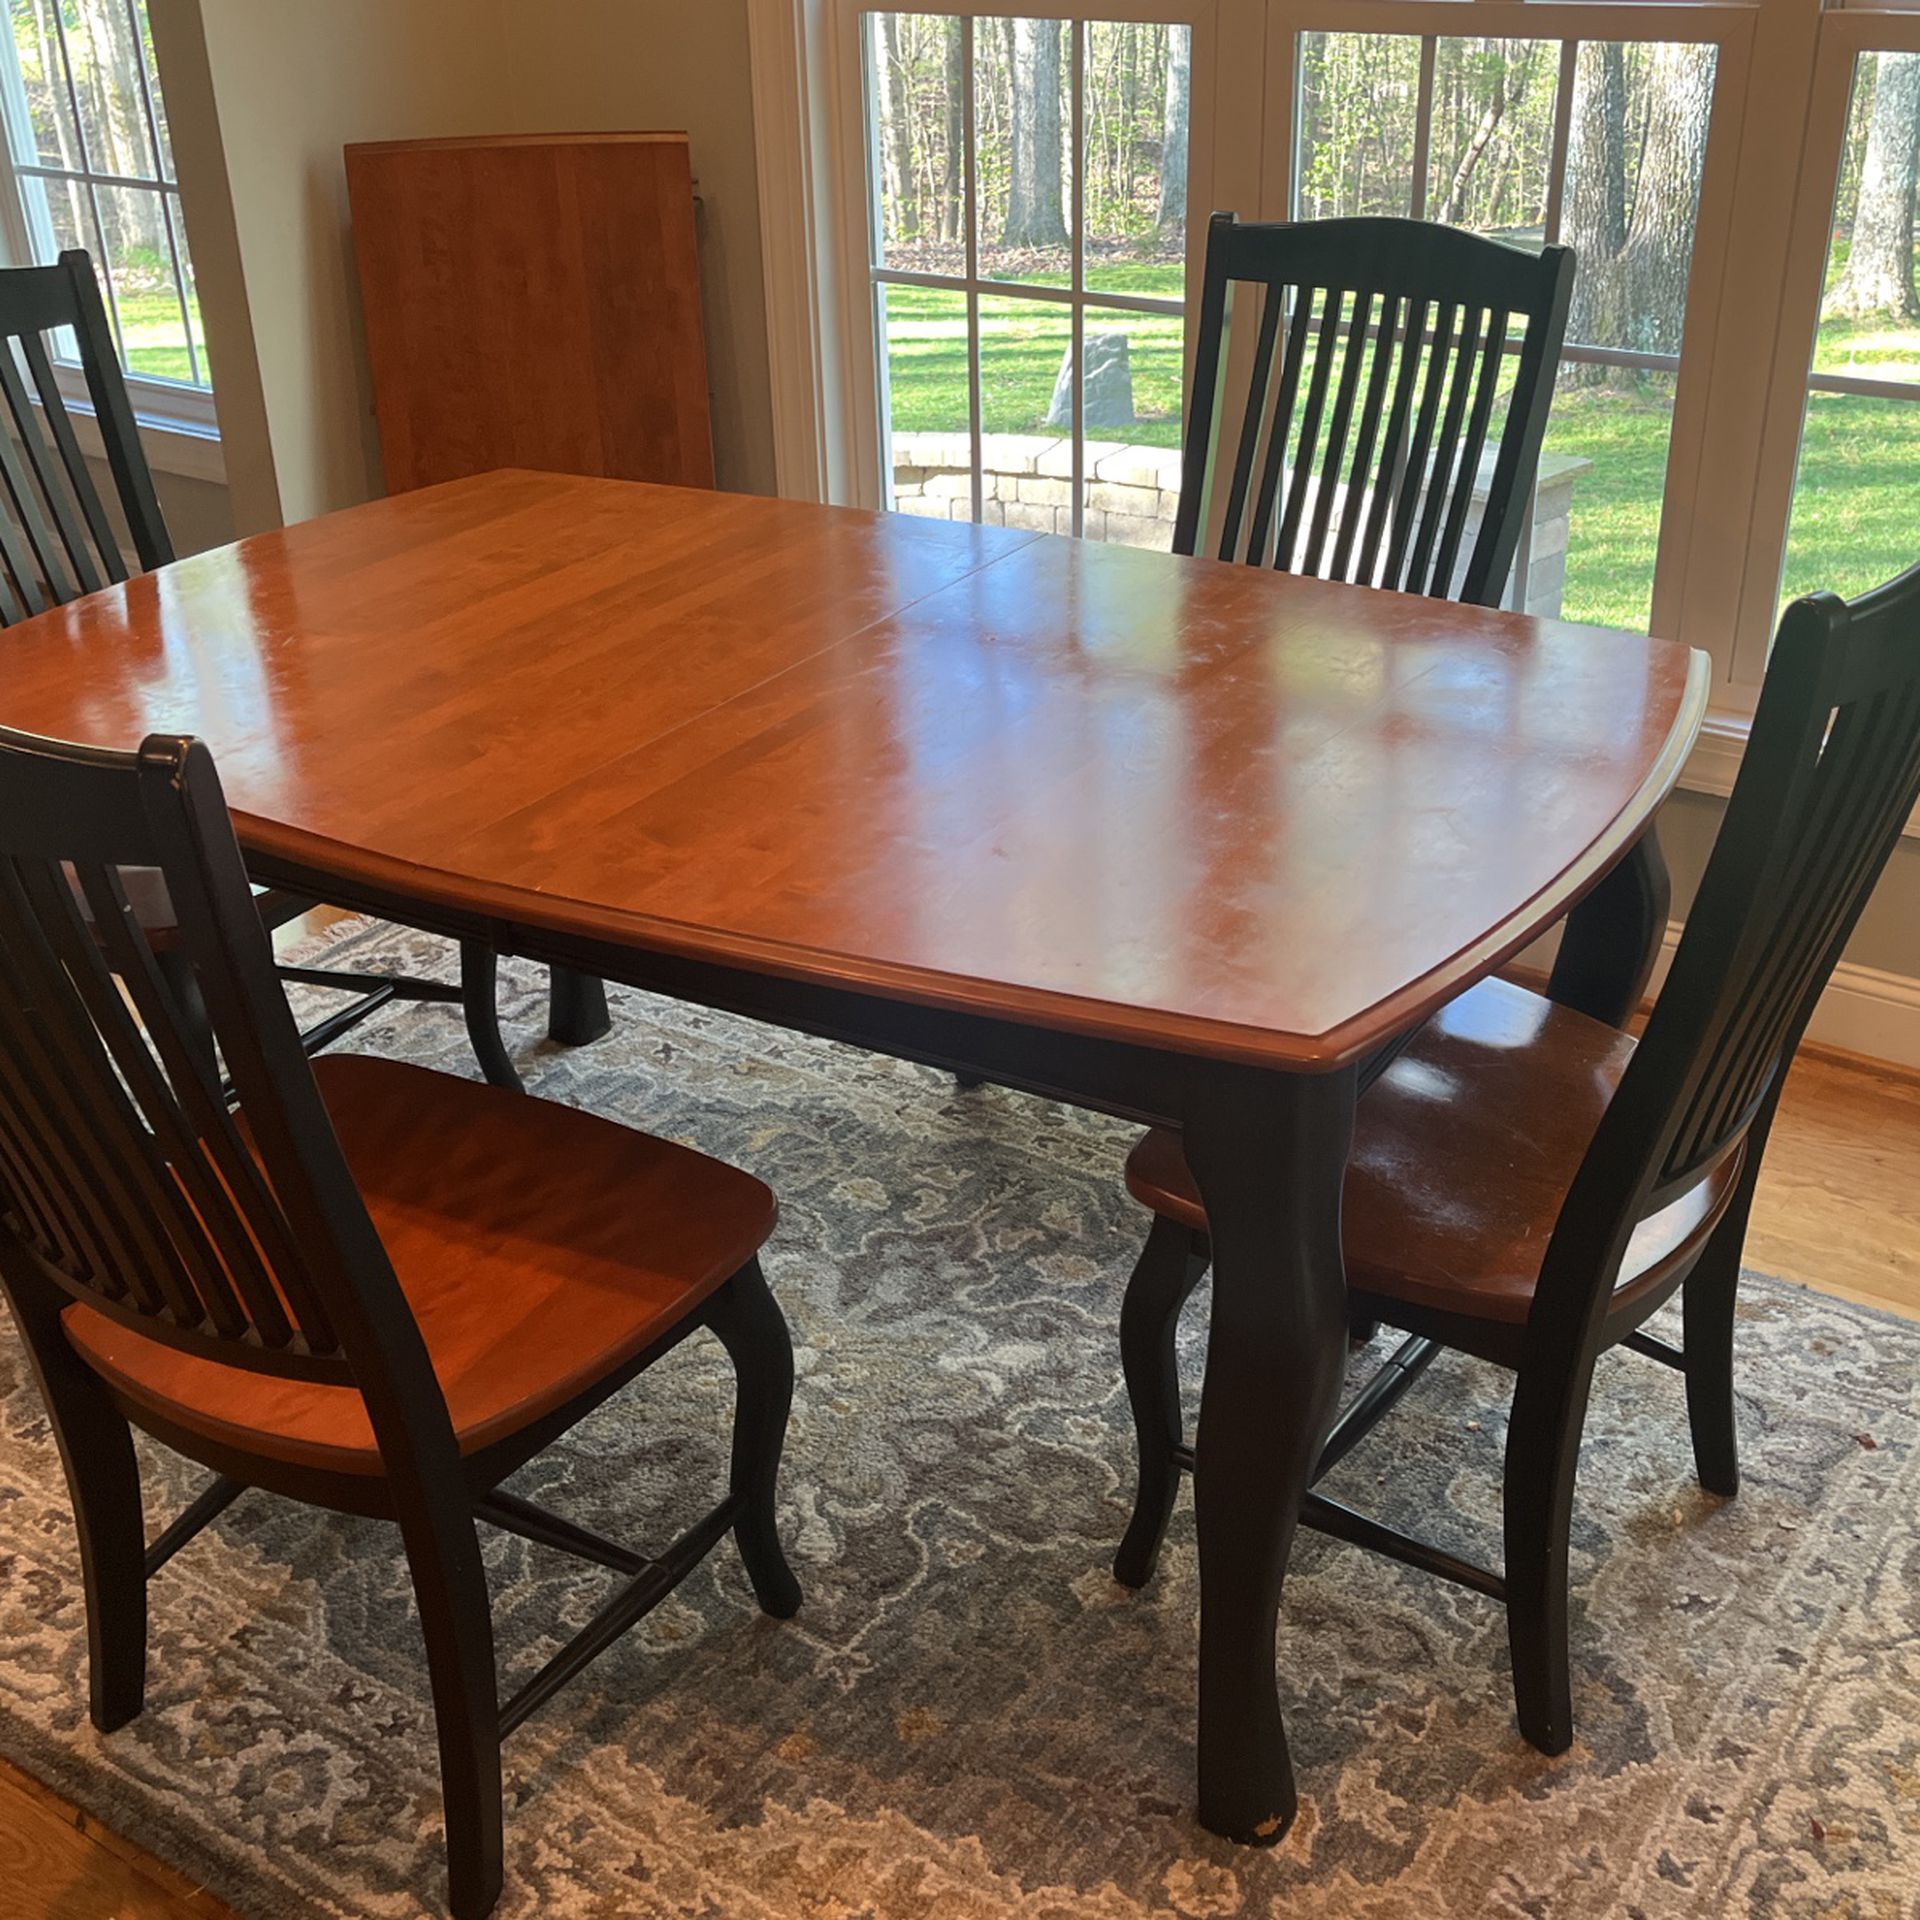 Dining/kitchen Table 4 Chairs